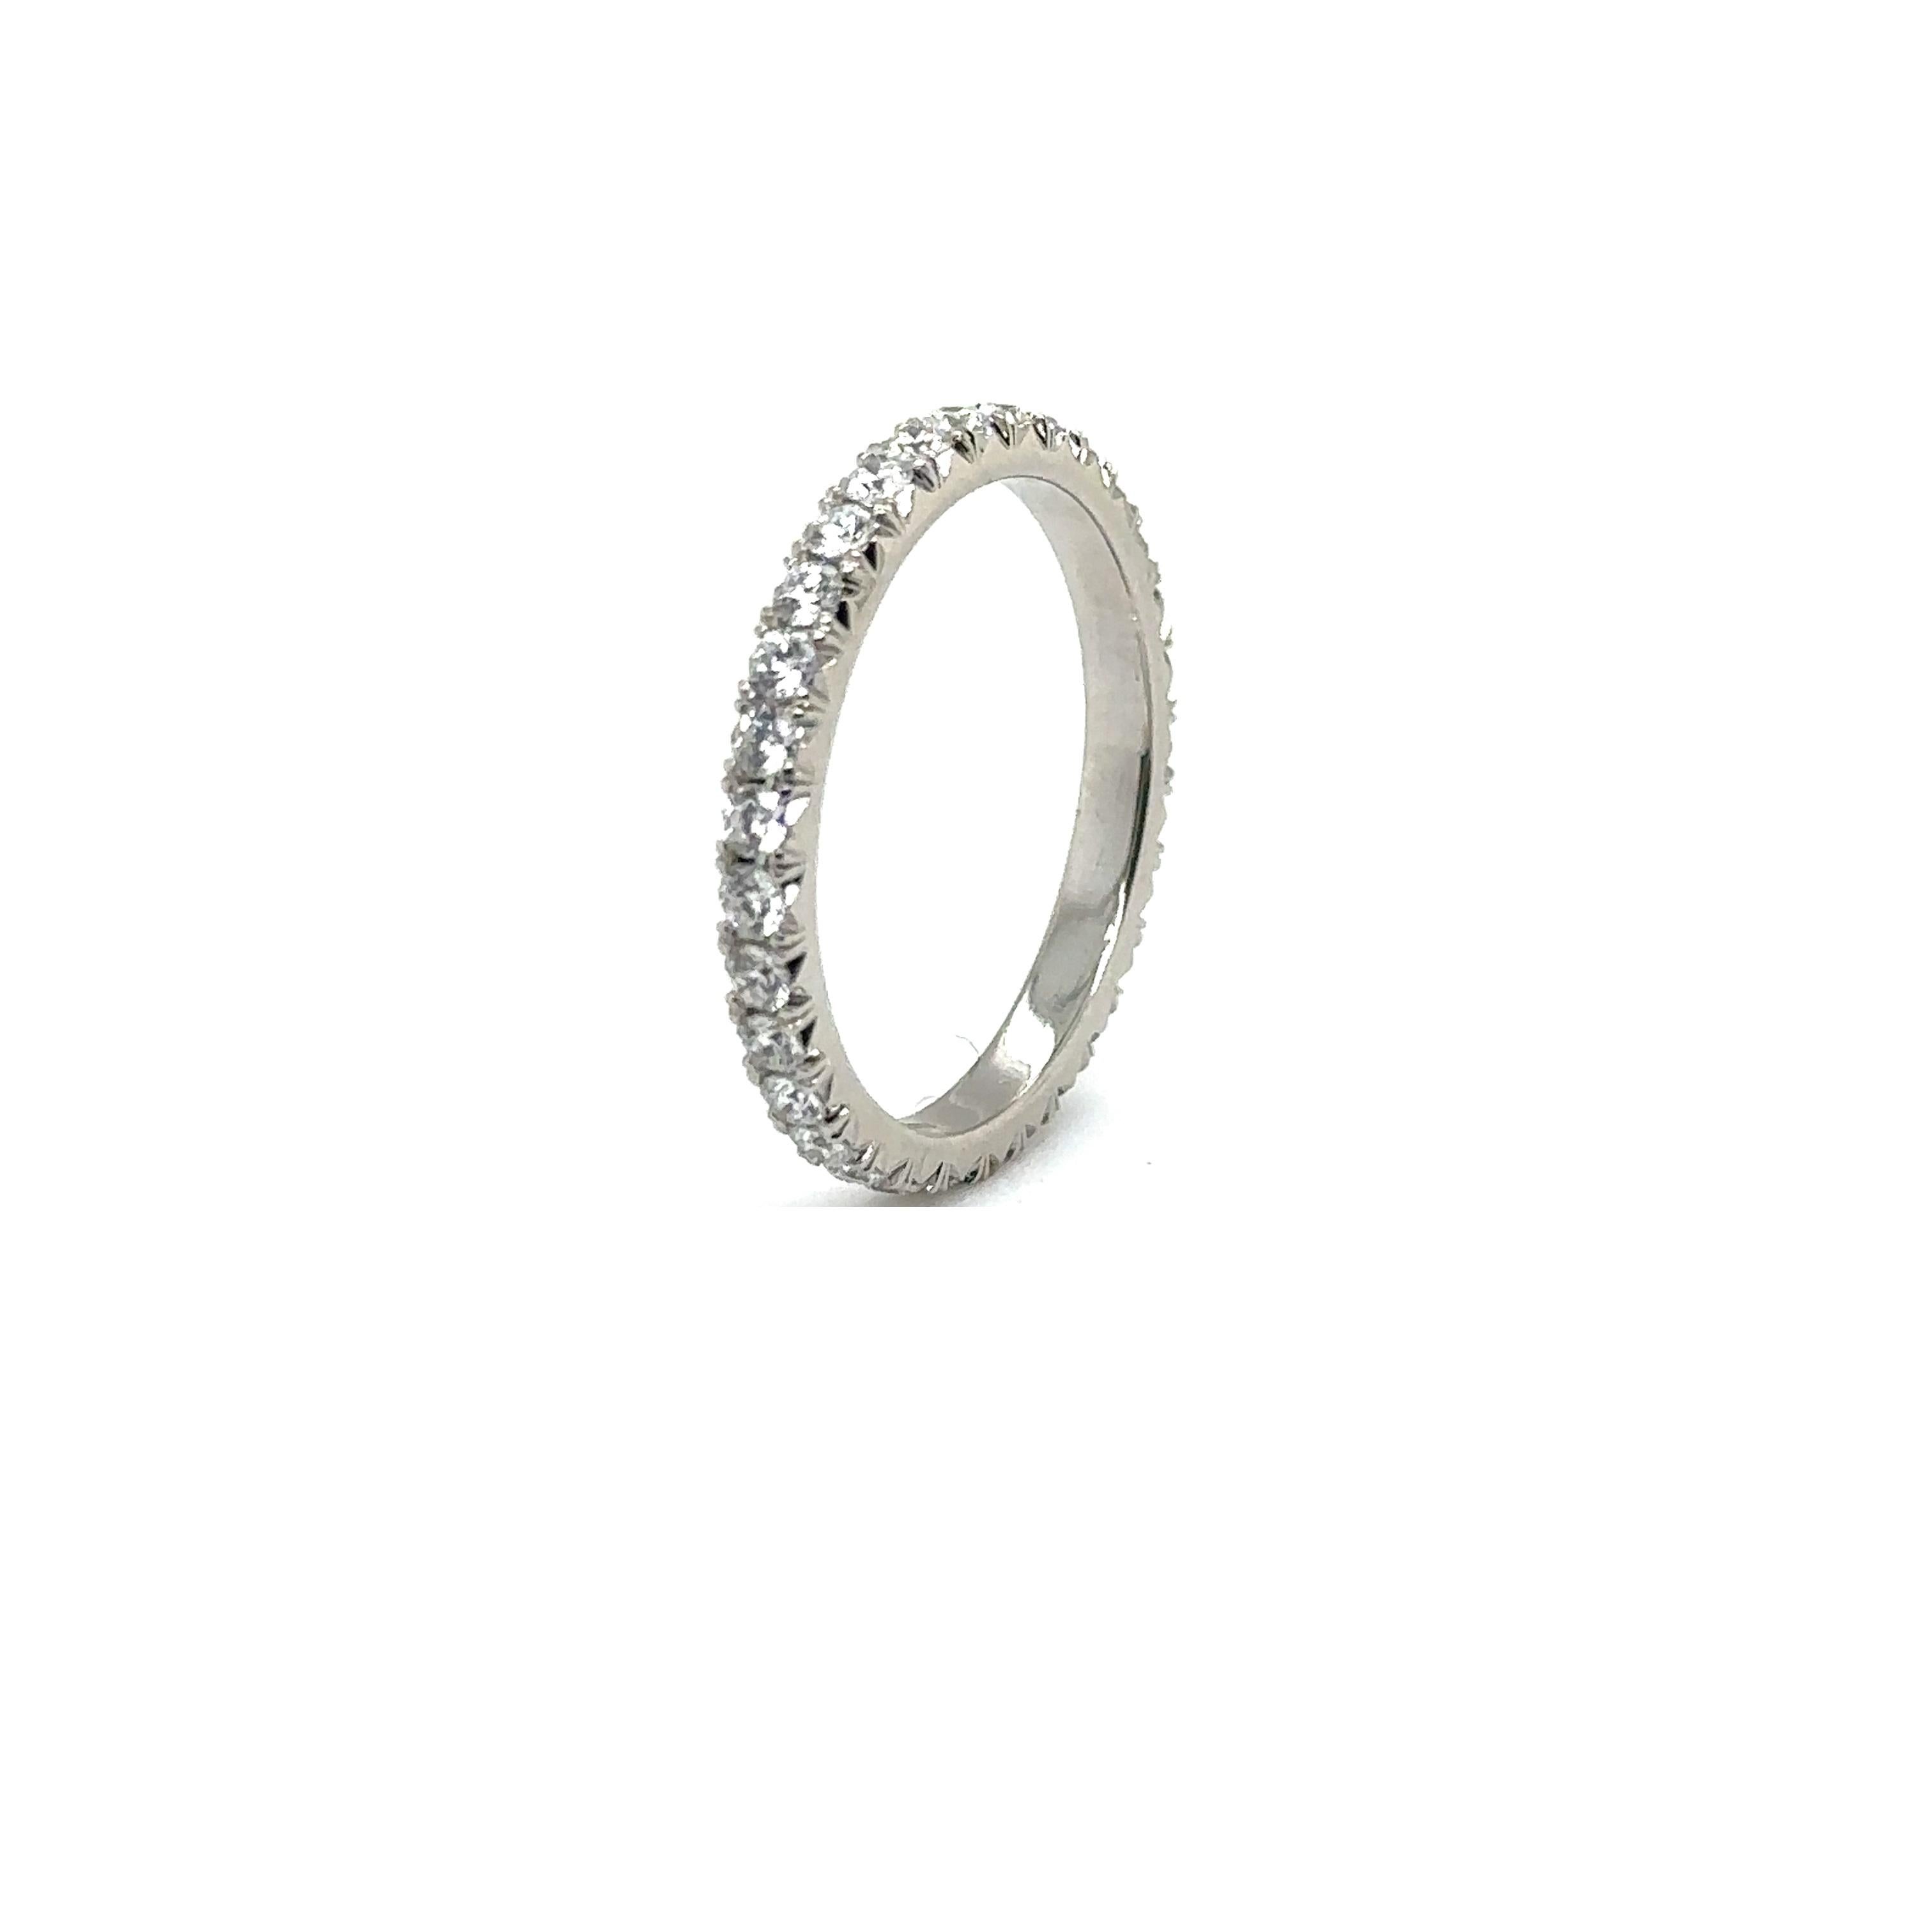 Modern WB31 PLAT - PLATINUM WEDDING BAND with 0.68 CWT DIAMONDS For Sale